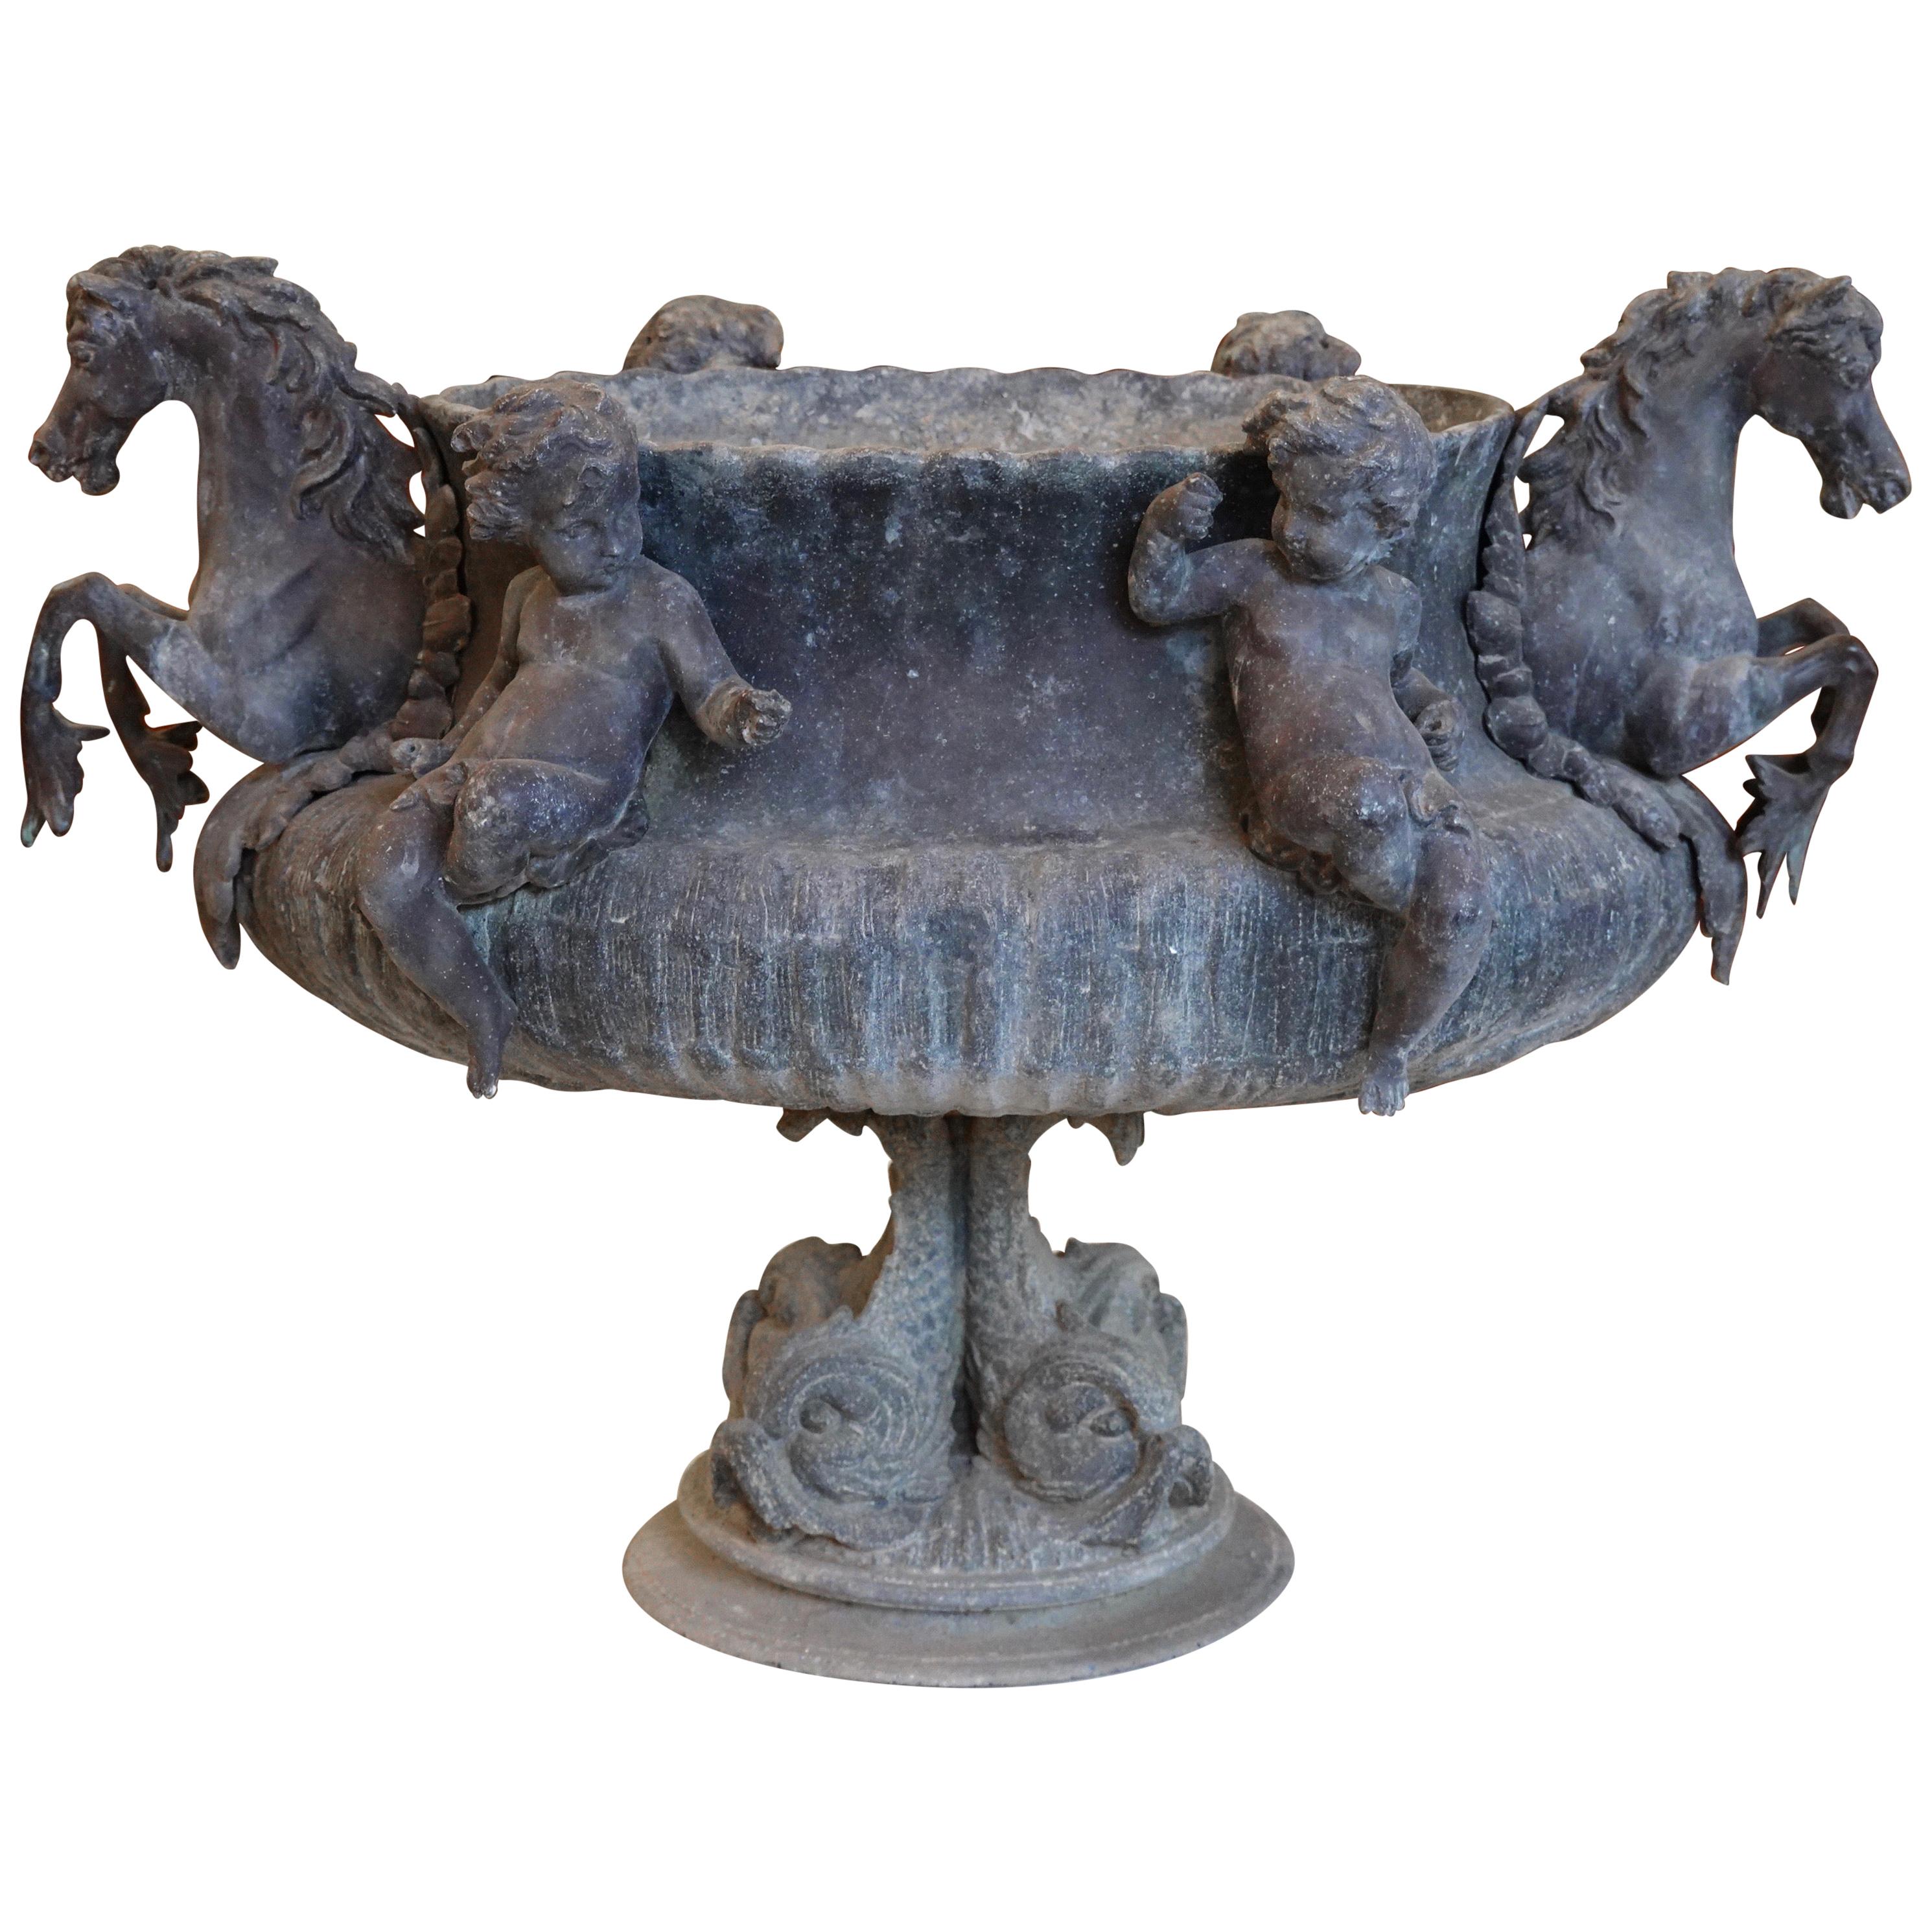 French Sculptural Jardinière with Putti, Mythical Sea Horses and Dolphins